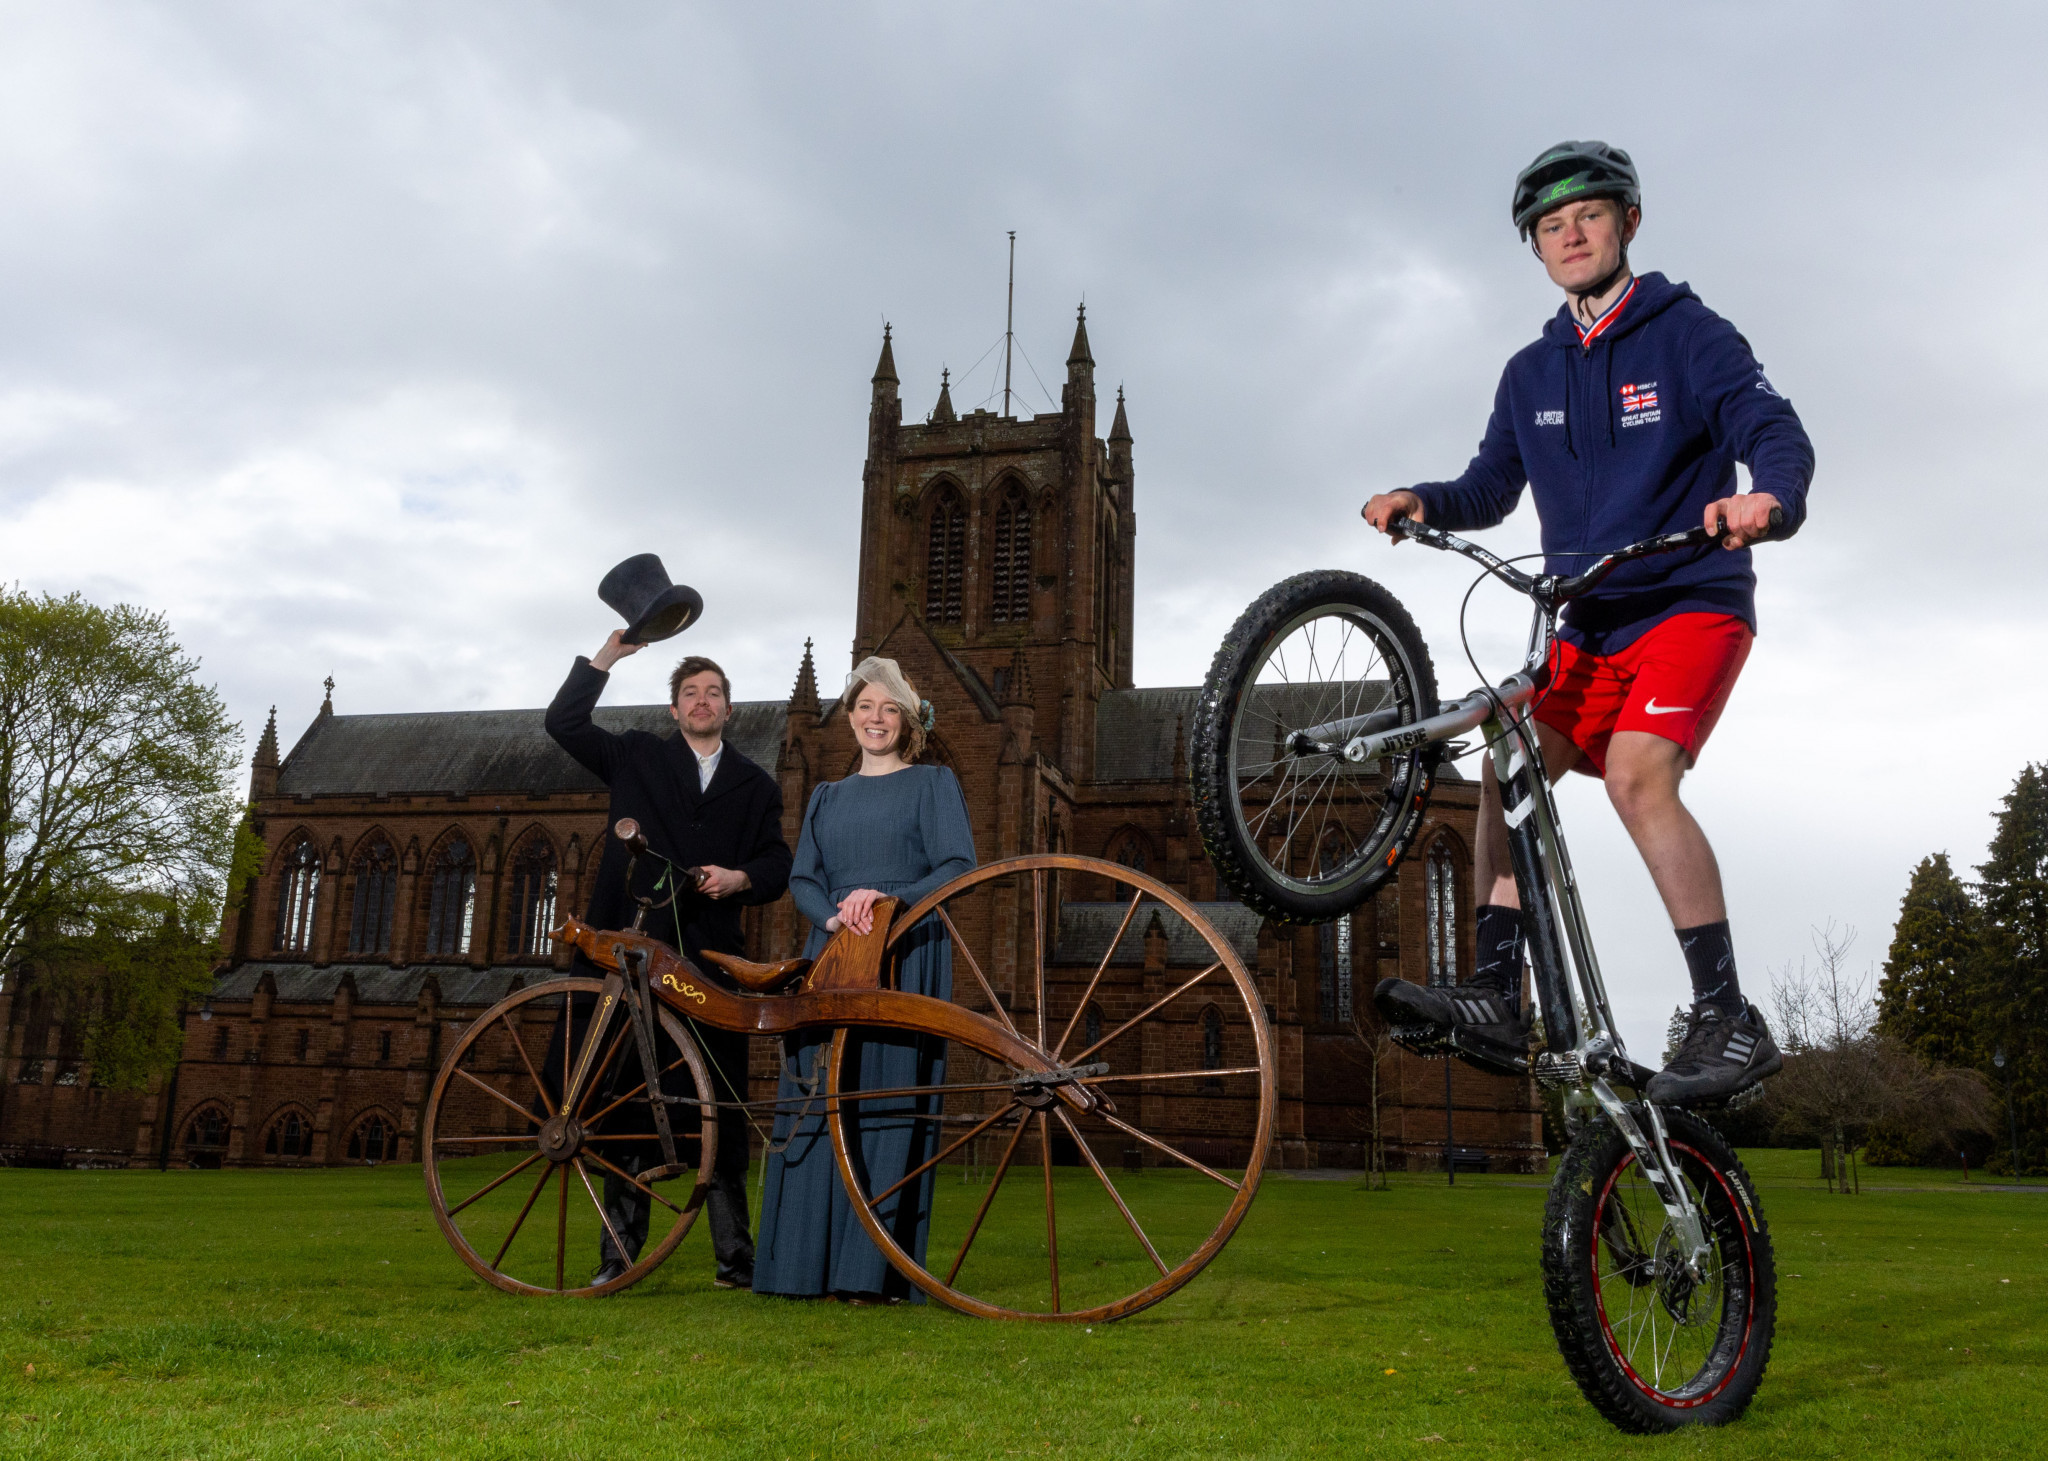 A replica of the treadle bike used on the first ride in 1842 was displayed alongside more modern machines to mark the 100-day countdown to the UCI World Championships ©UCI